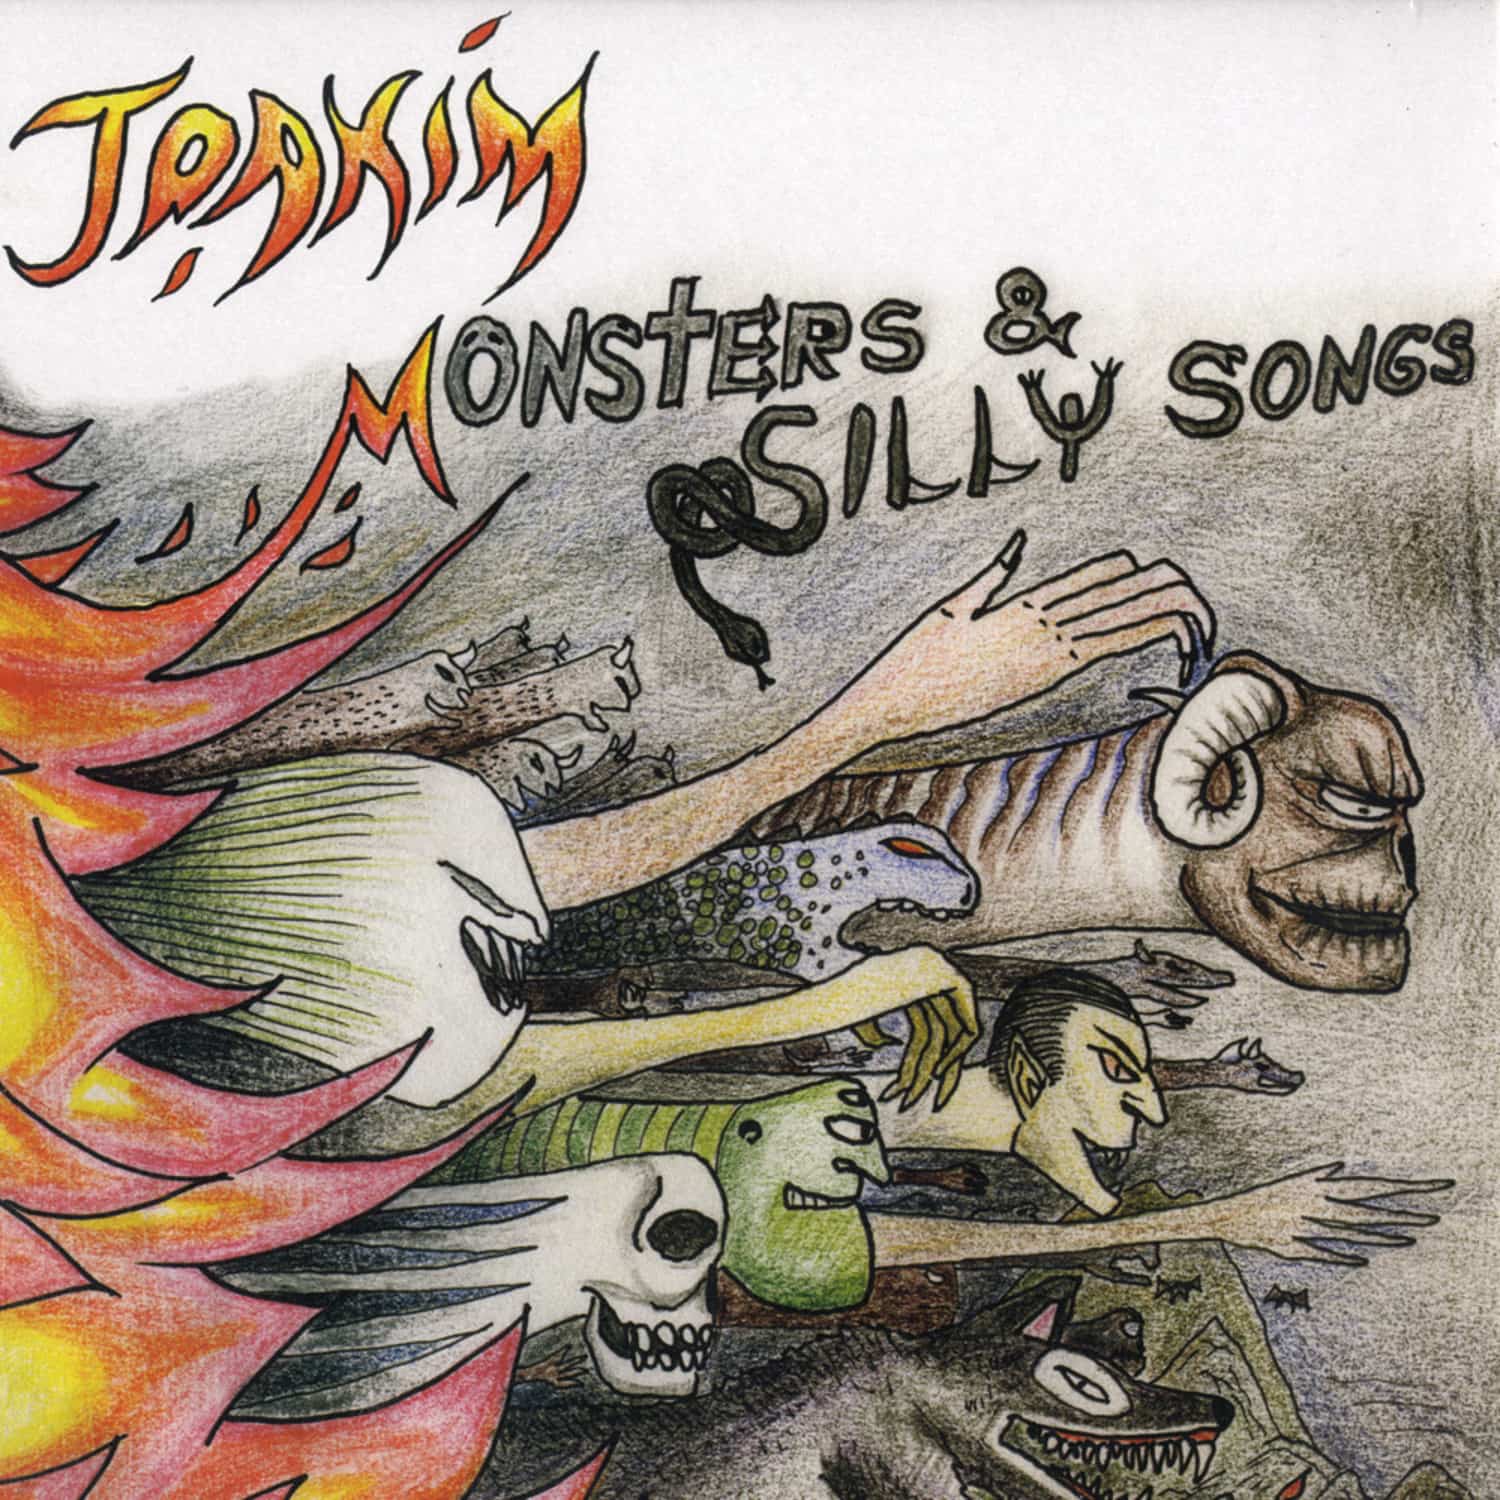 Joakim - MONSTERS & SILLY SONGS 